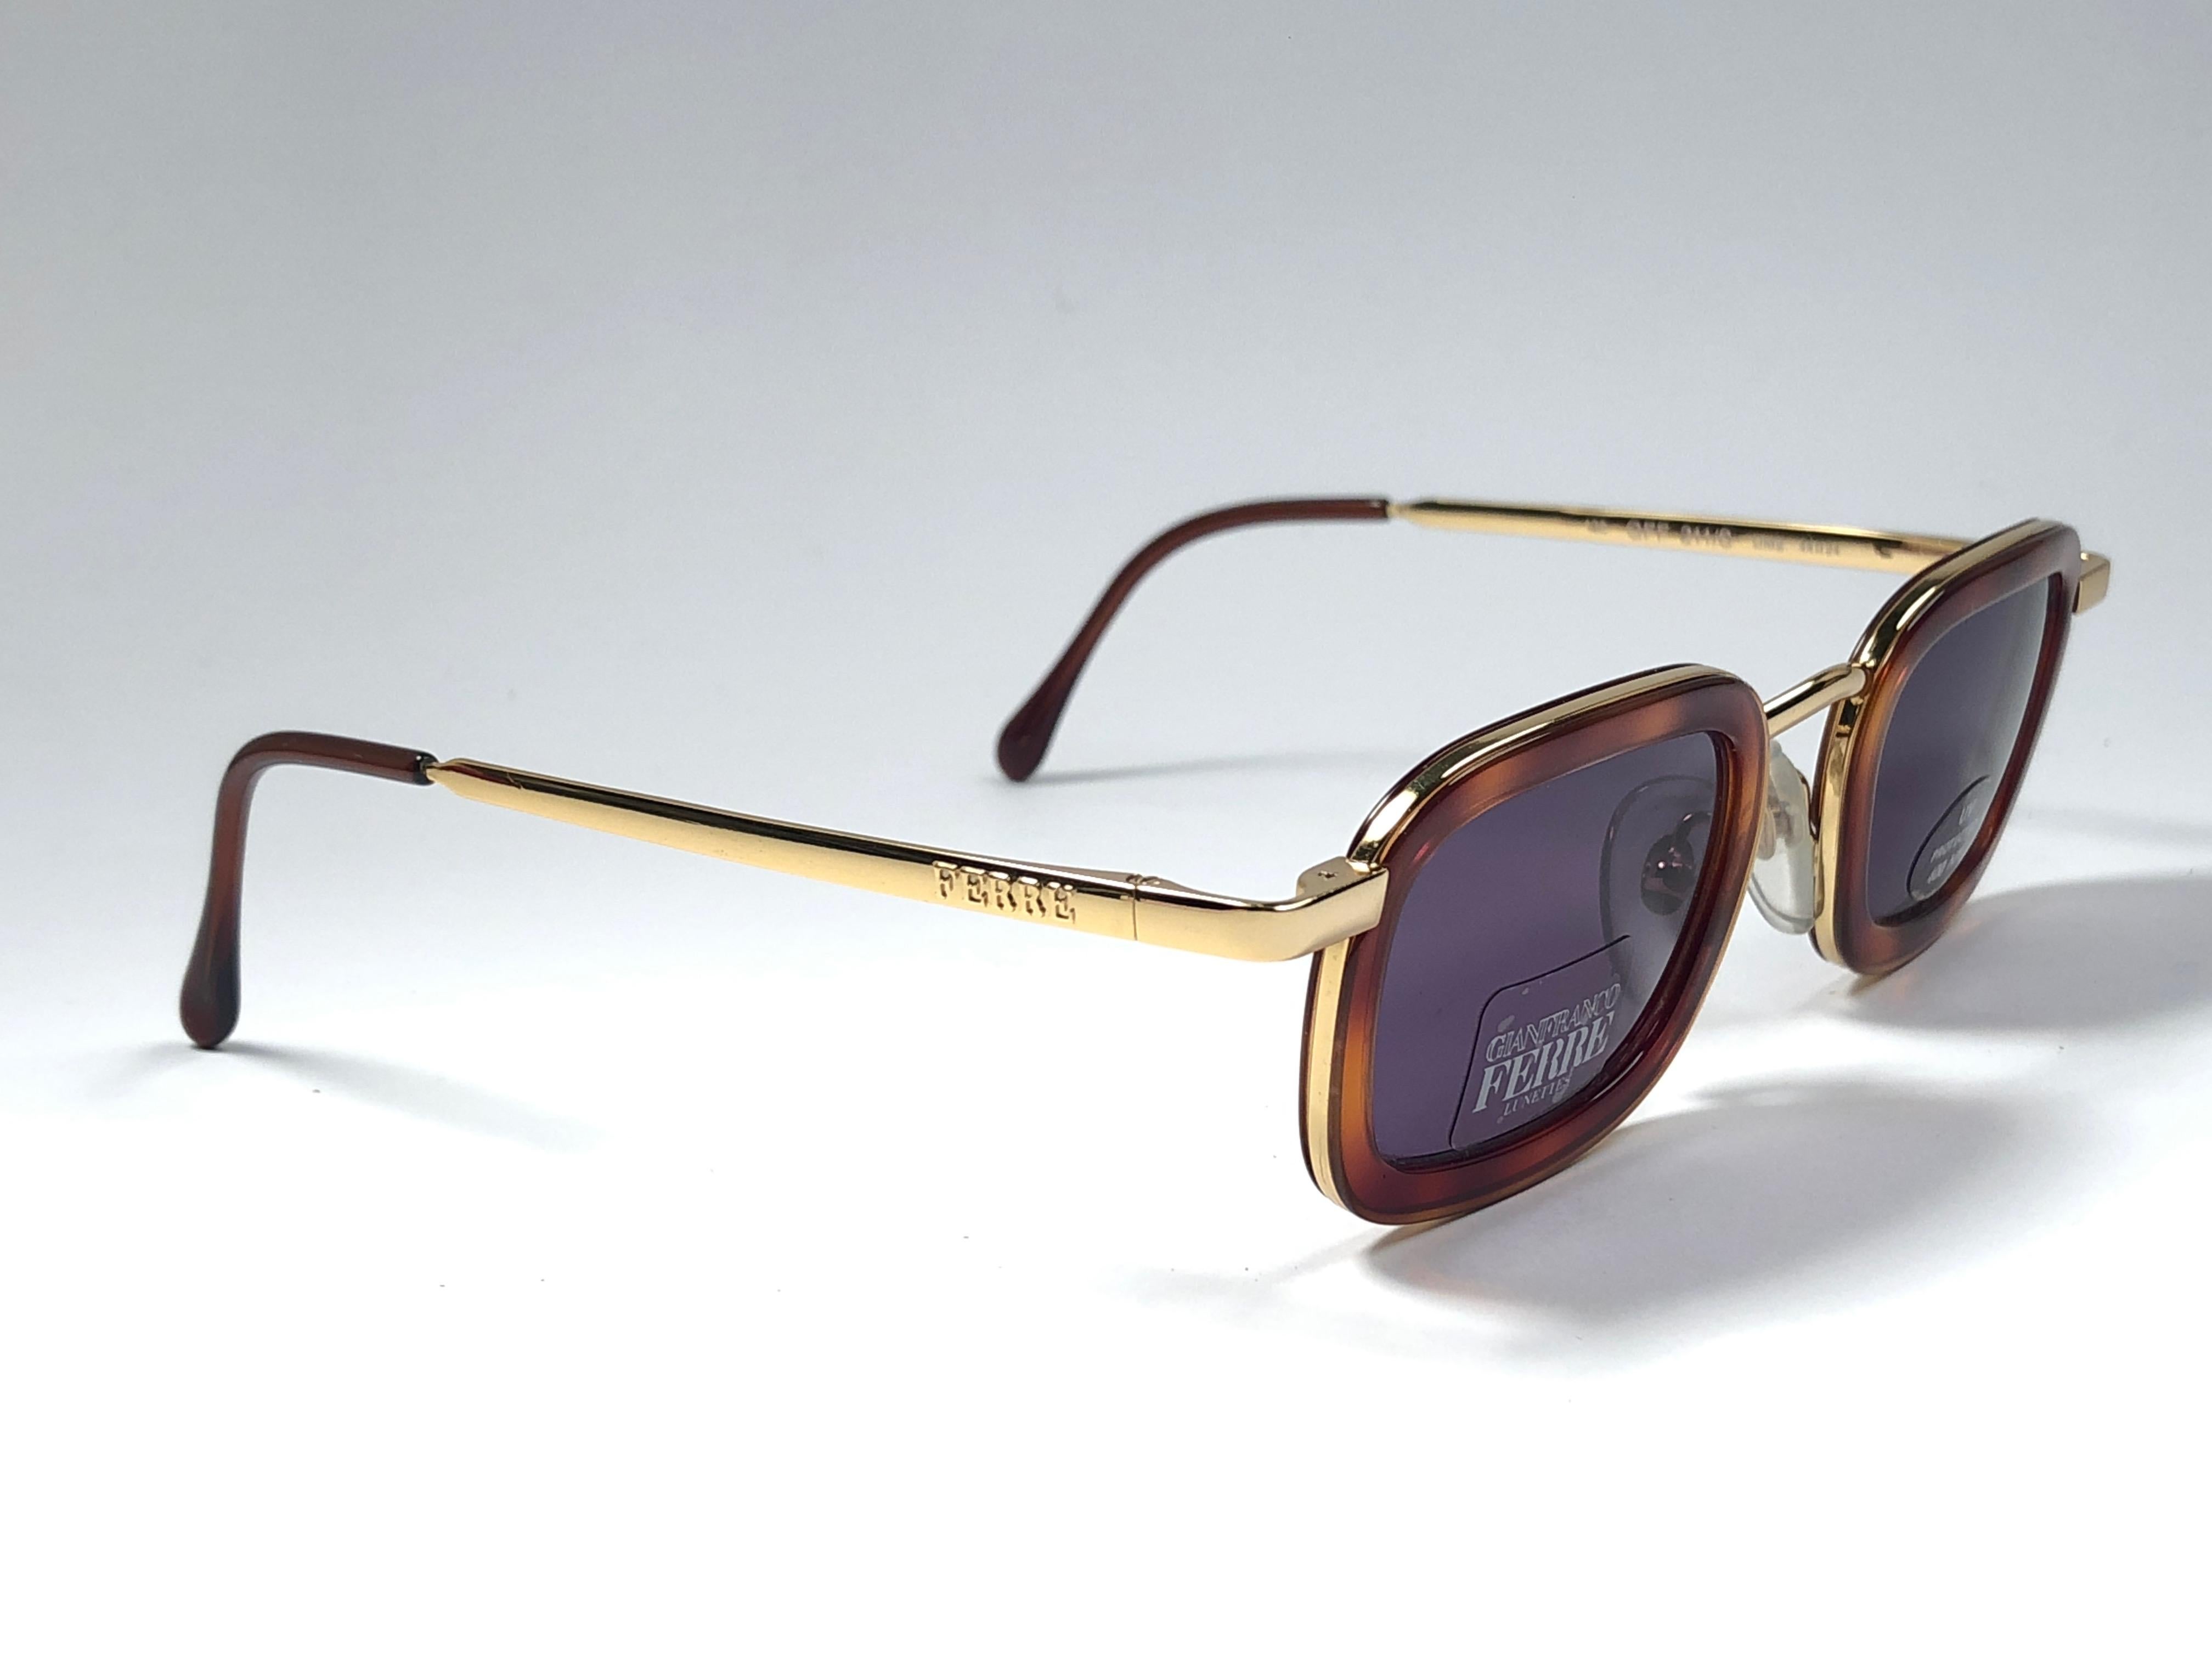 New vintage Gianfranco Ferre sunglasses.    

Gold and tortoise details frame holding a pair of spotless grey lenses.   

New, never worn or displayed. 

 Made in Italy.